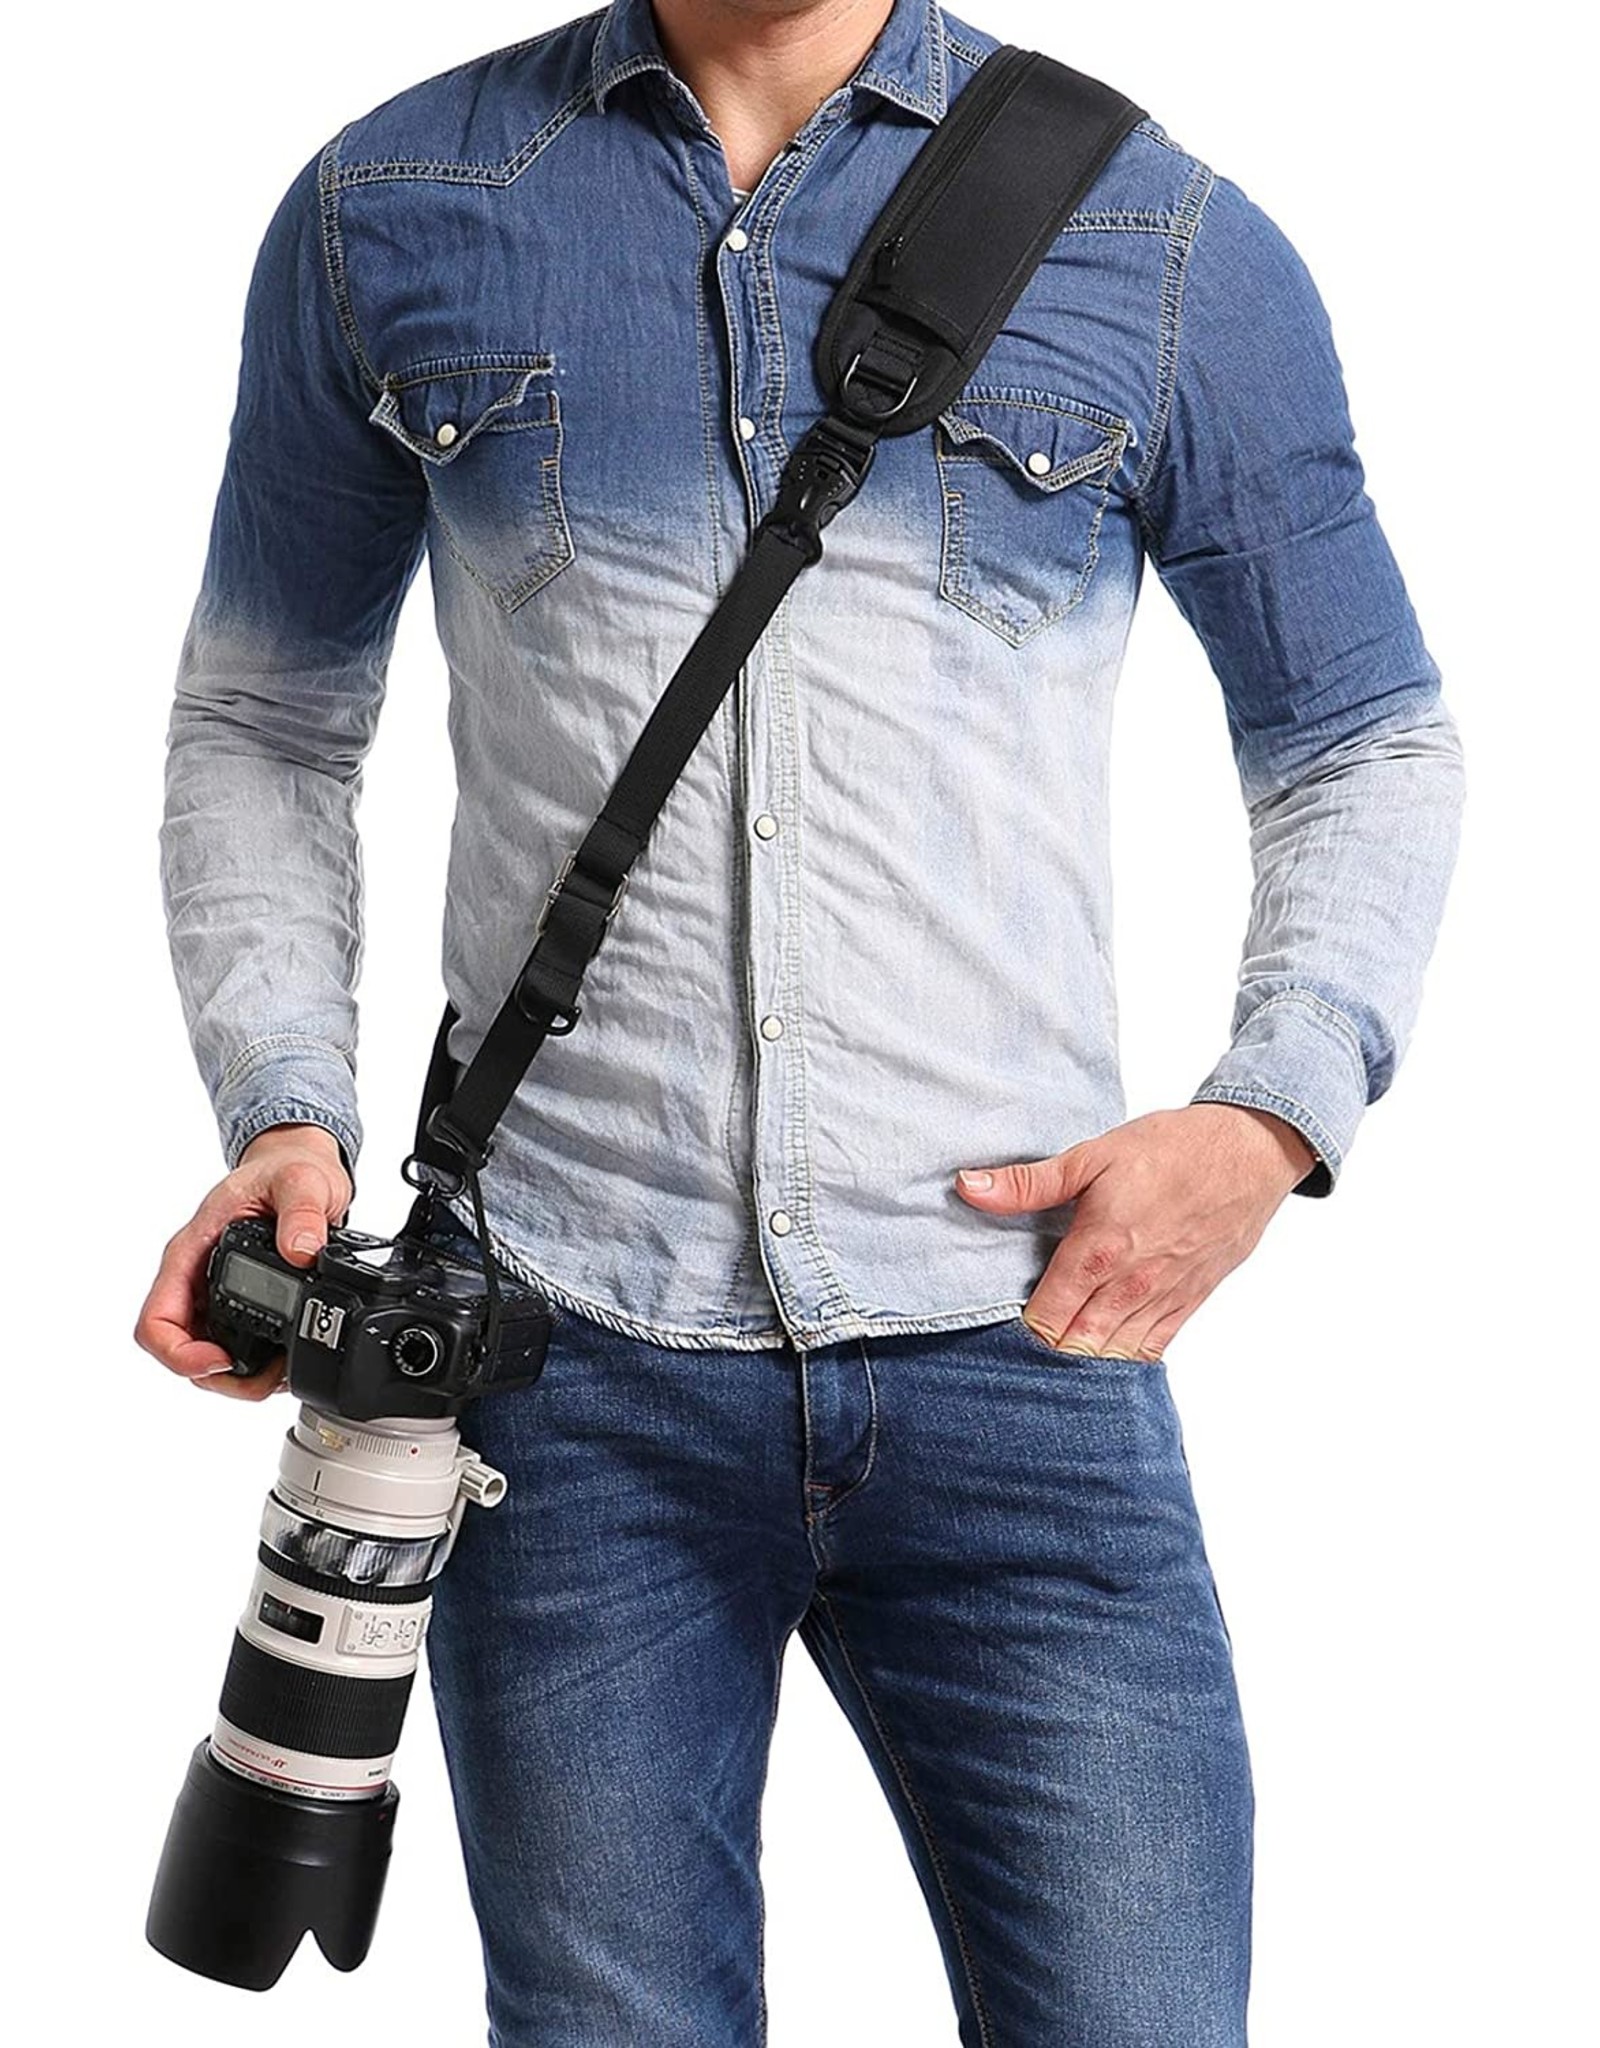 Camera Strap Camera Neck Strap With Quick-release Buckles For